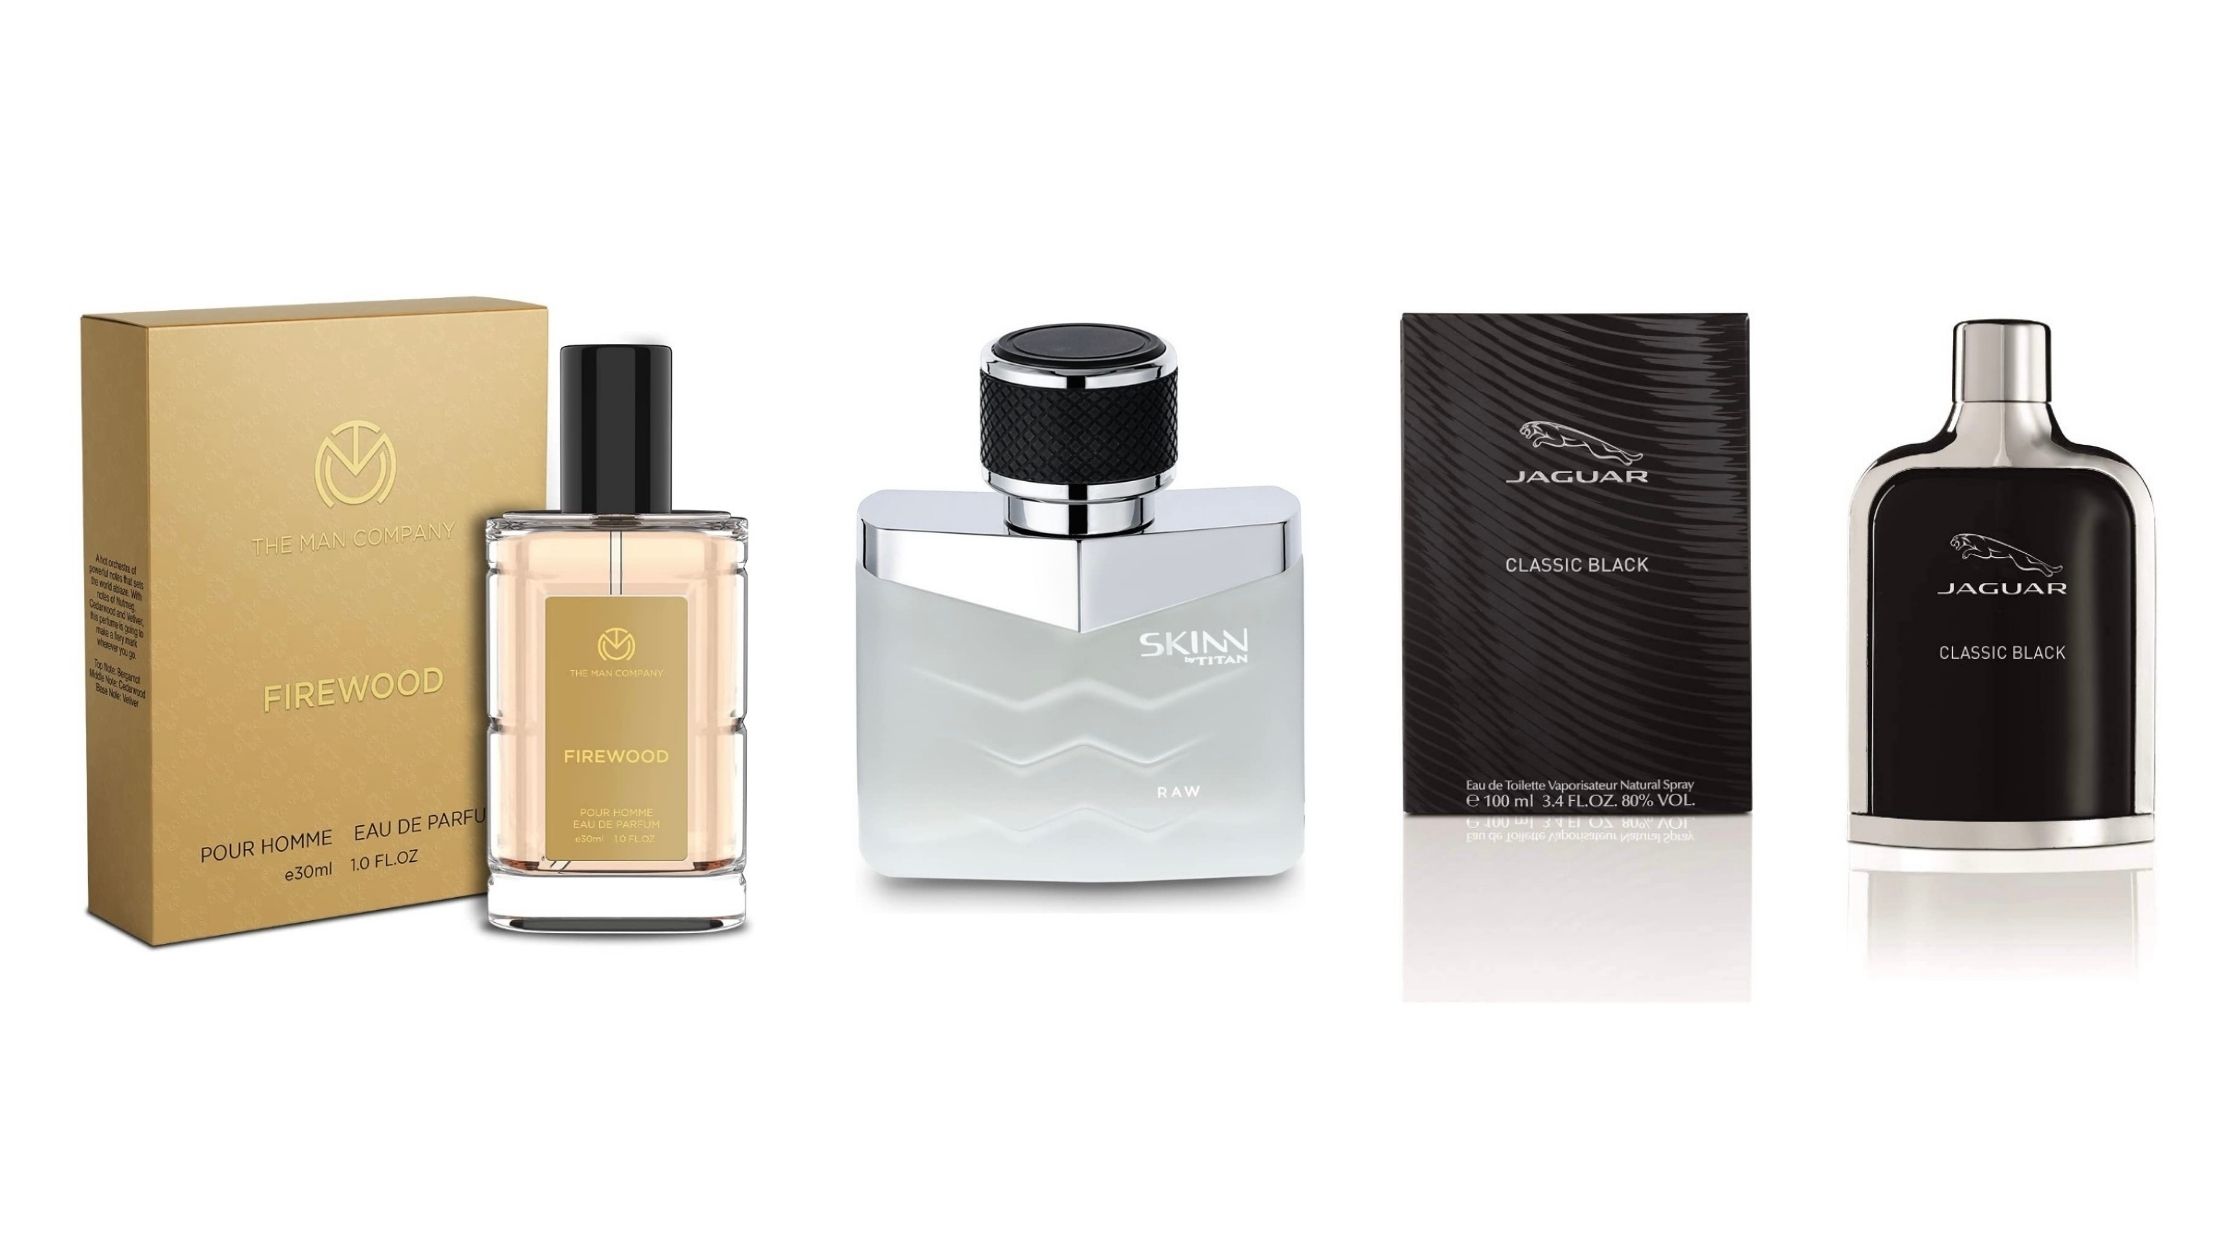 15 Best Perfume For Men Under 2000 In India On Amazon - FRUGAL VIEW